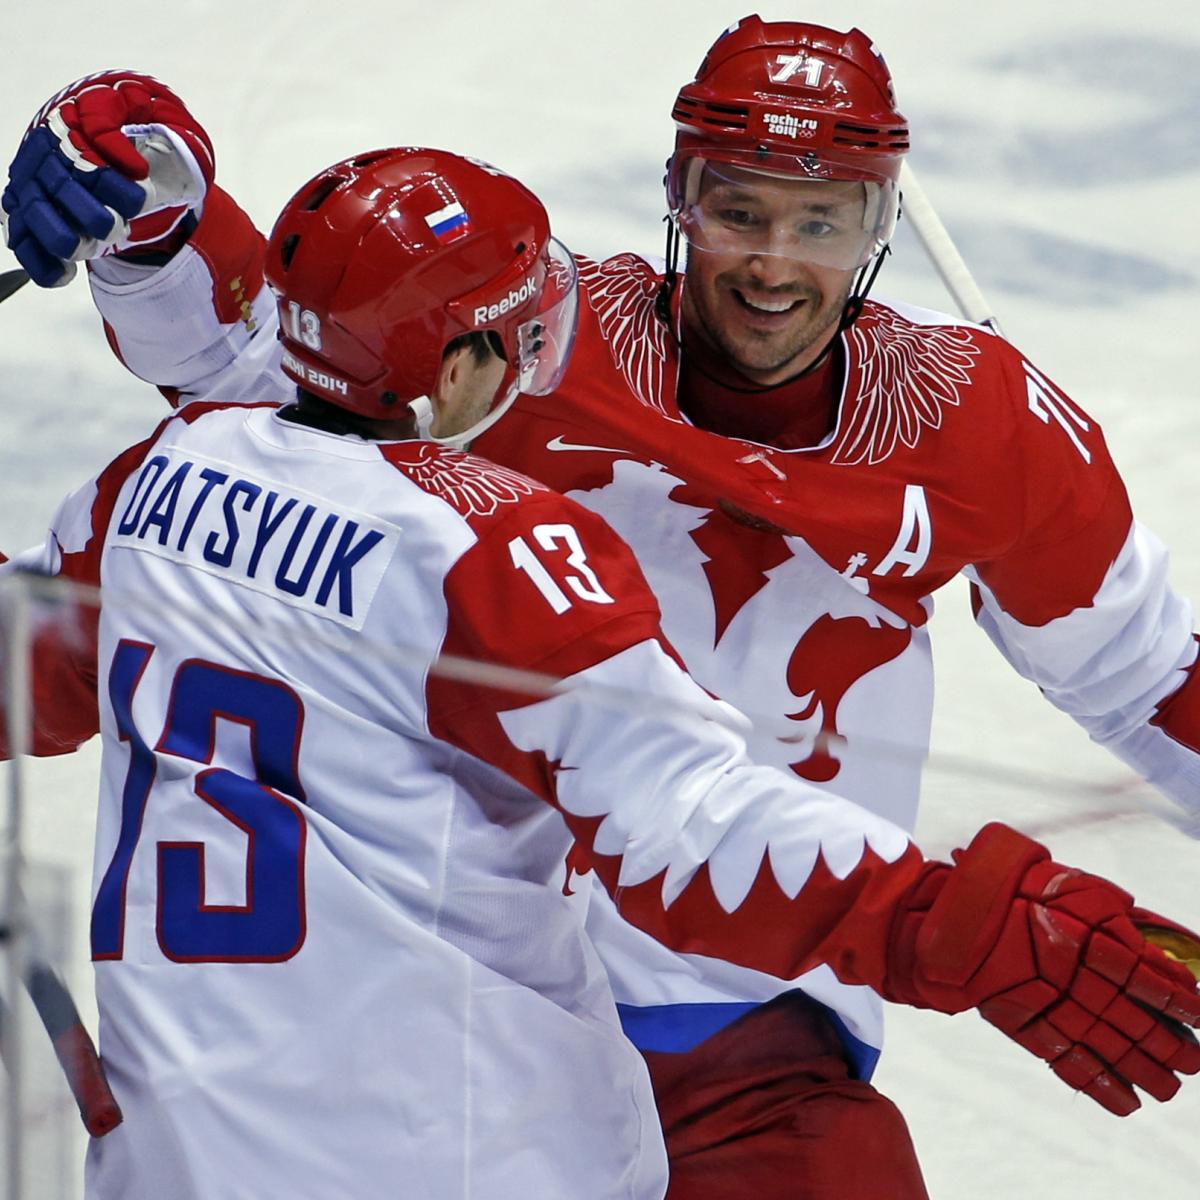 US men's hockey set to 'get through' Russians for gold